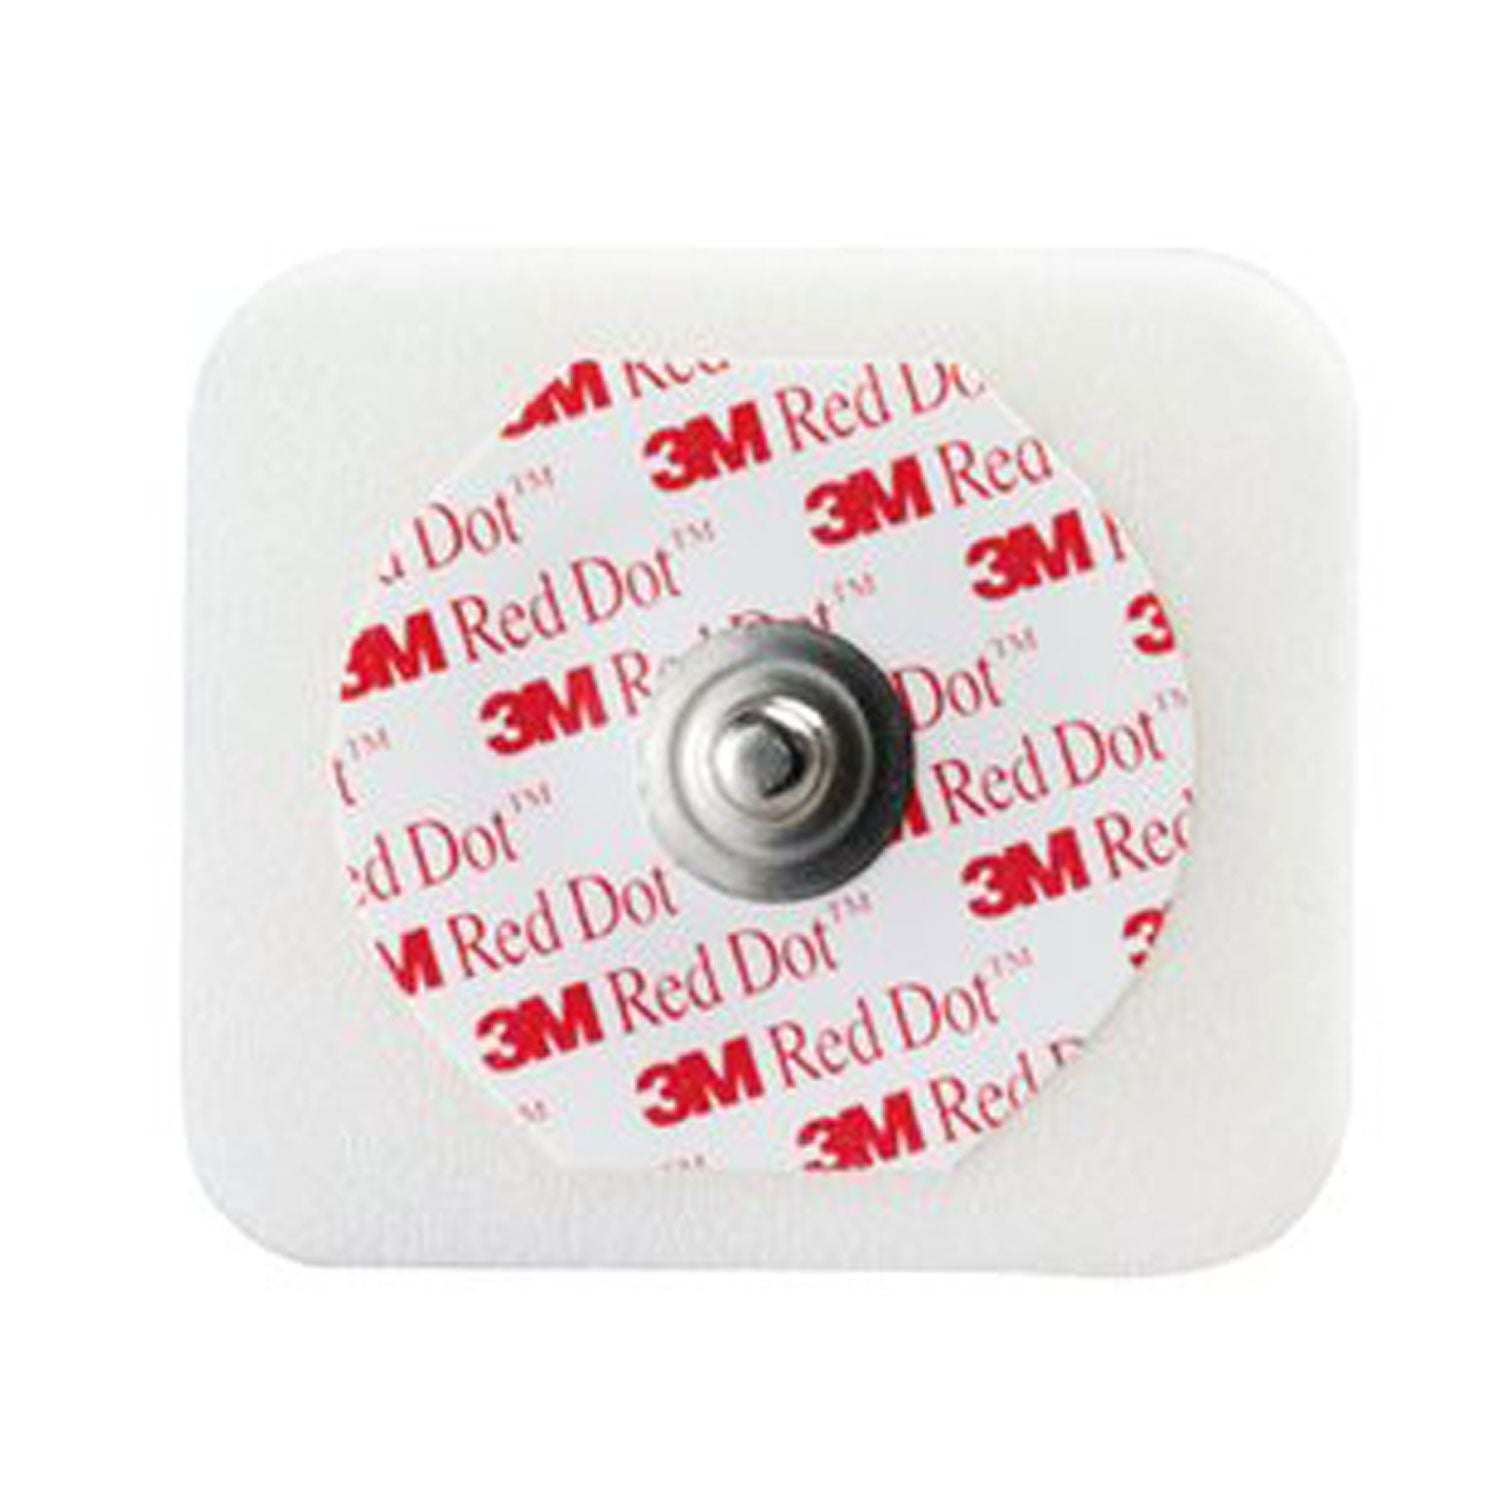 3M Red Dot Monitoring Electrodes | Adult | Pack of 50